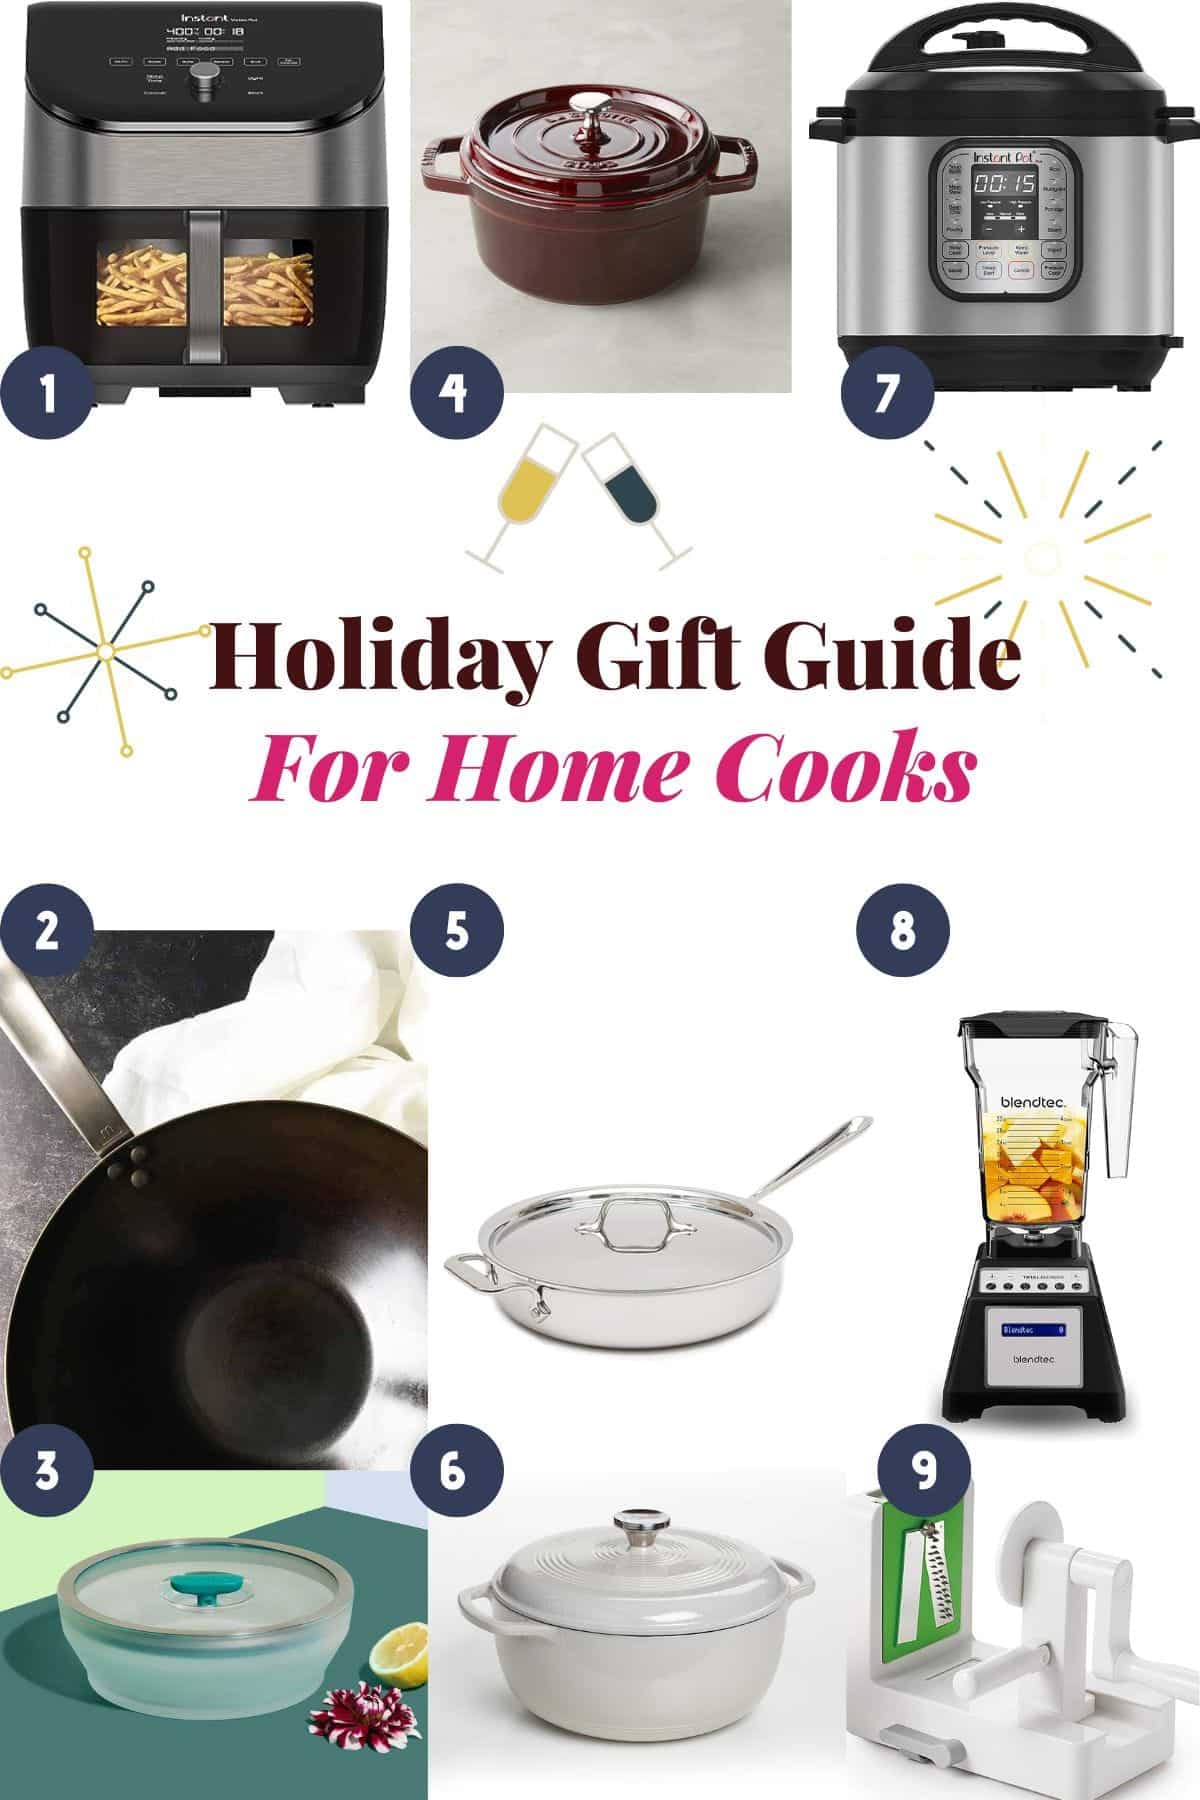 Photo shows a collage of Christmas holiday gift ideas for home cooks